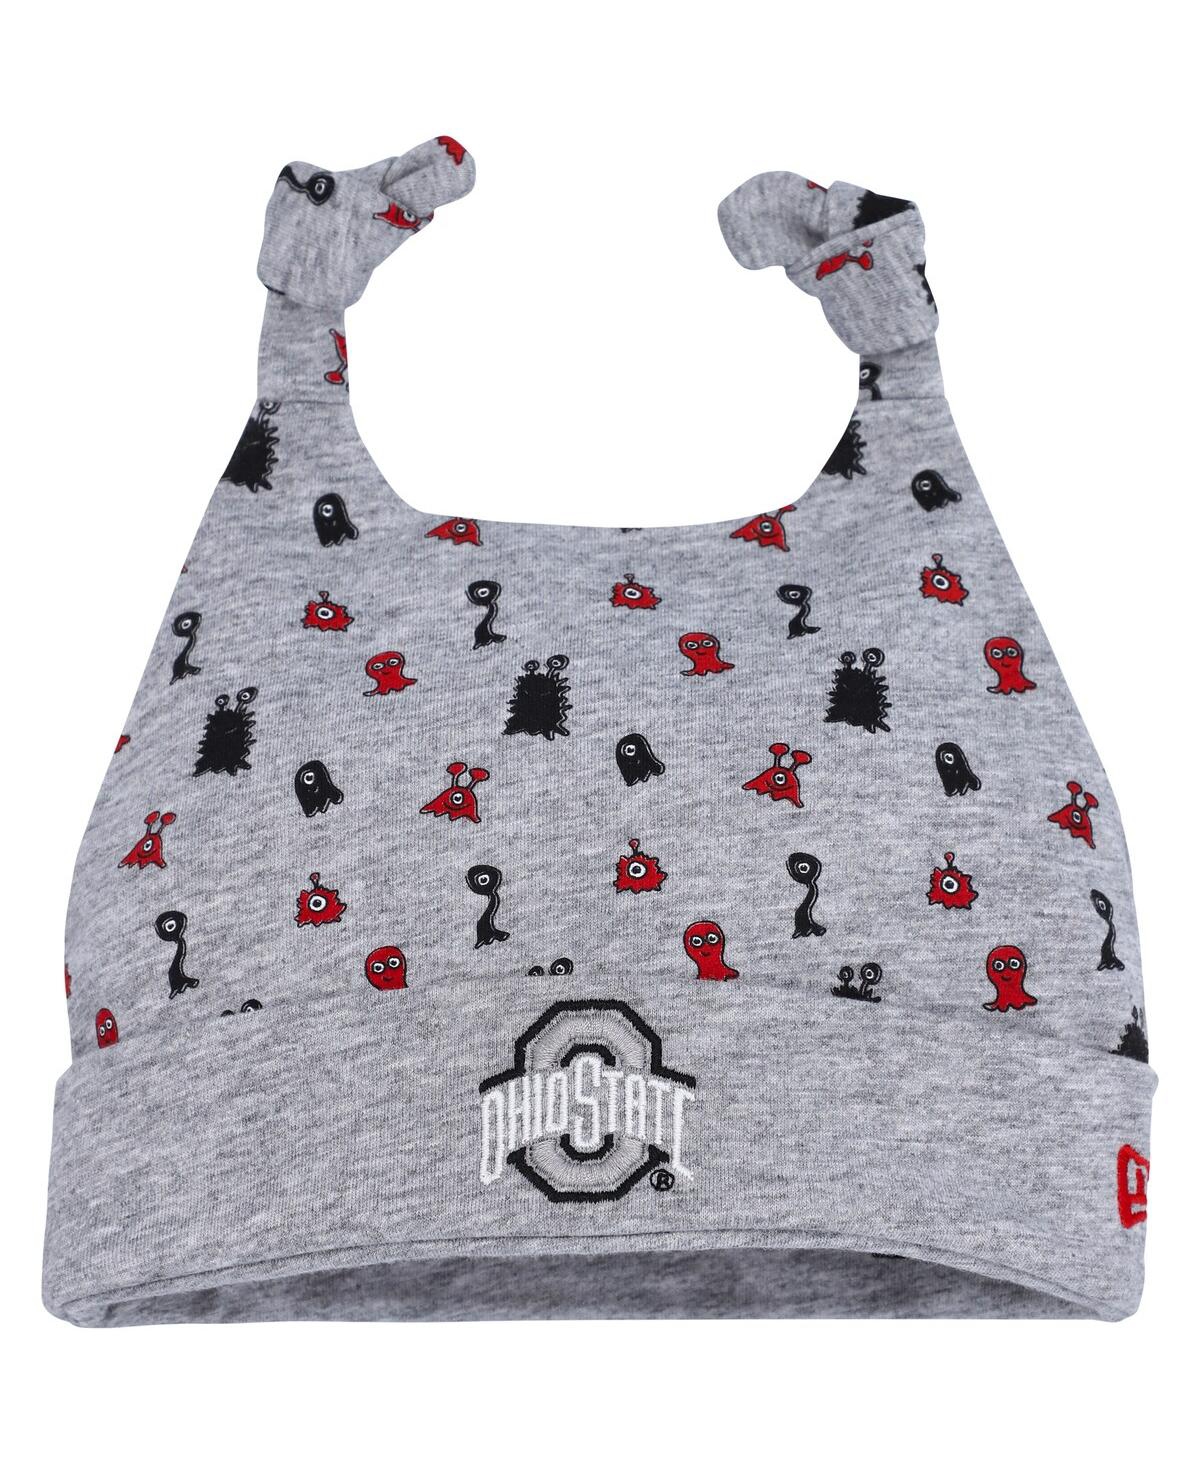 New Era Babies' Newborn And Infant Boys And Girls  Heather Gray Ohio State Buckeyes Critter Cuffed Knit Hat